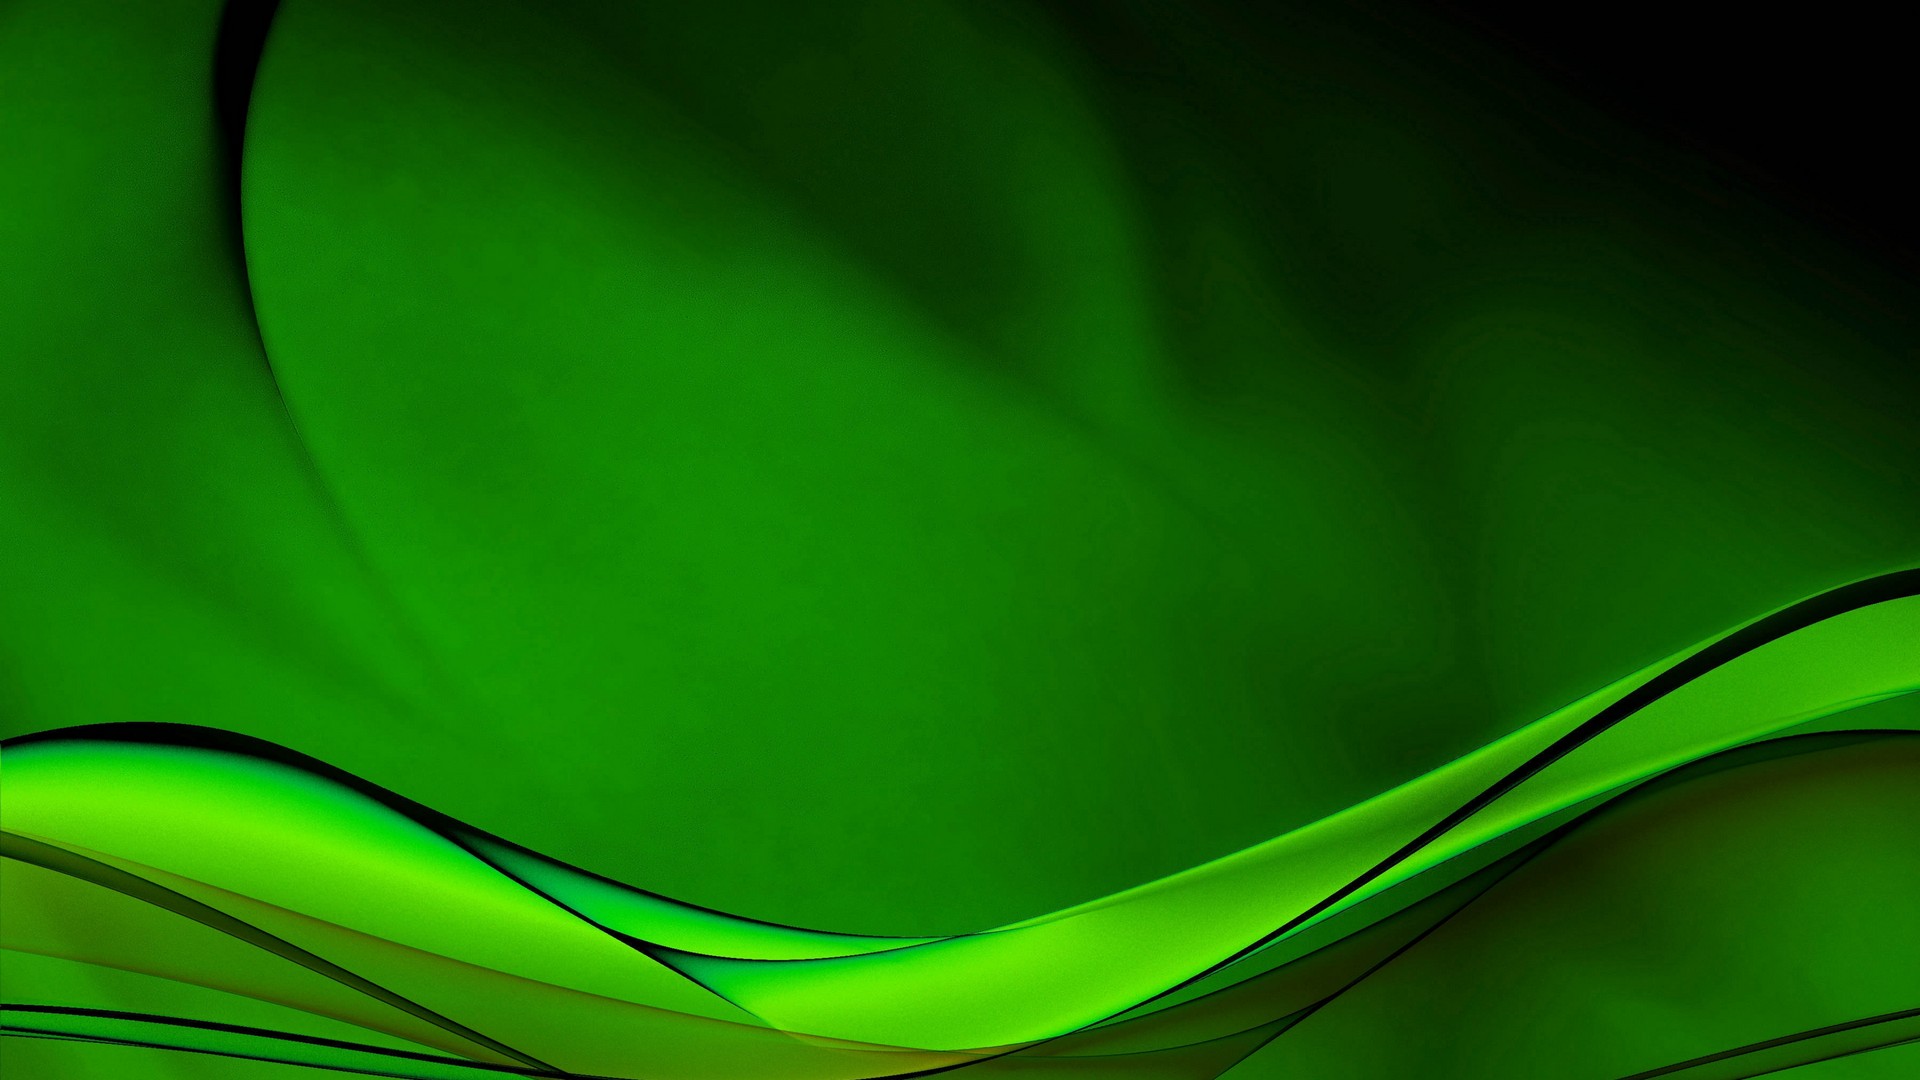 Neon Green HD Wallpaper With Resolution 1920X1080 pixel. You can make this wallpaper for your Desktop Computer Backgrounds, Mac Wallpapers, Android Lock screen or iPhone Screensavers